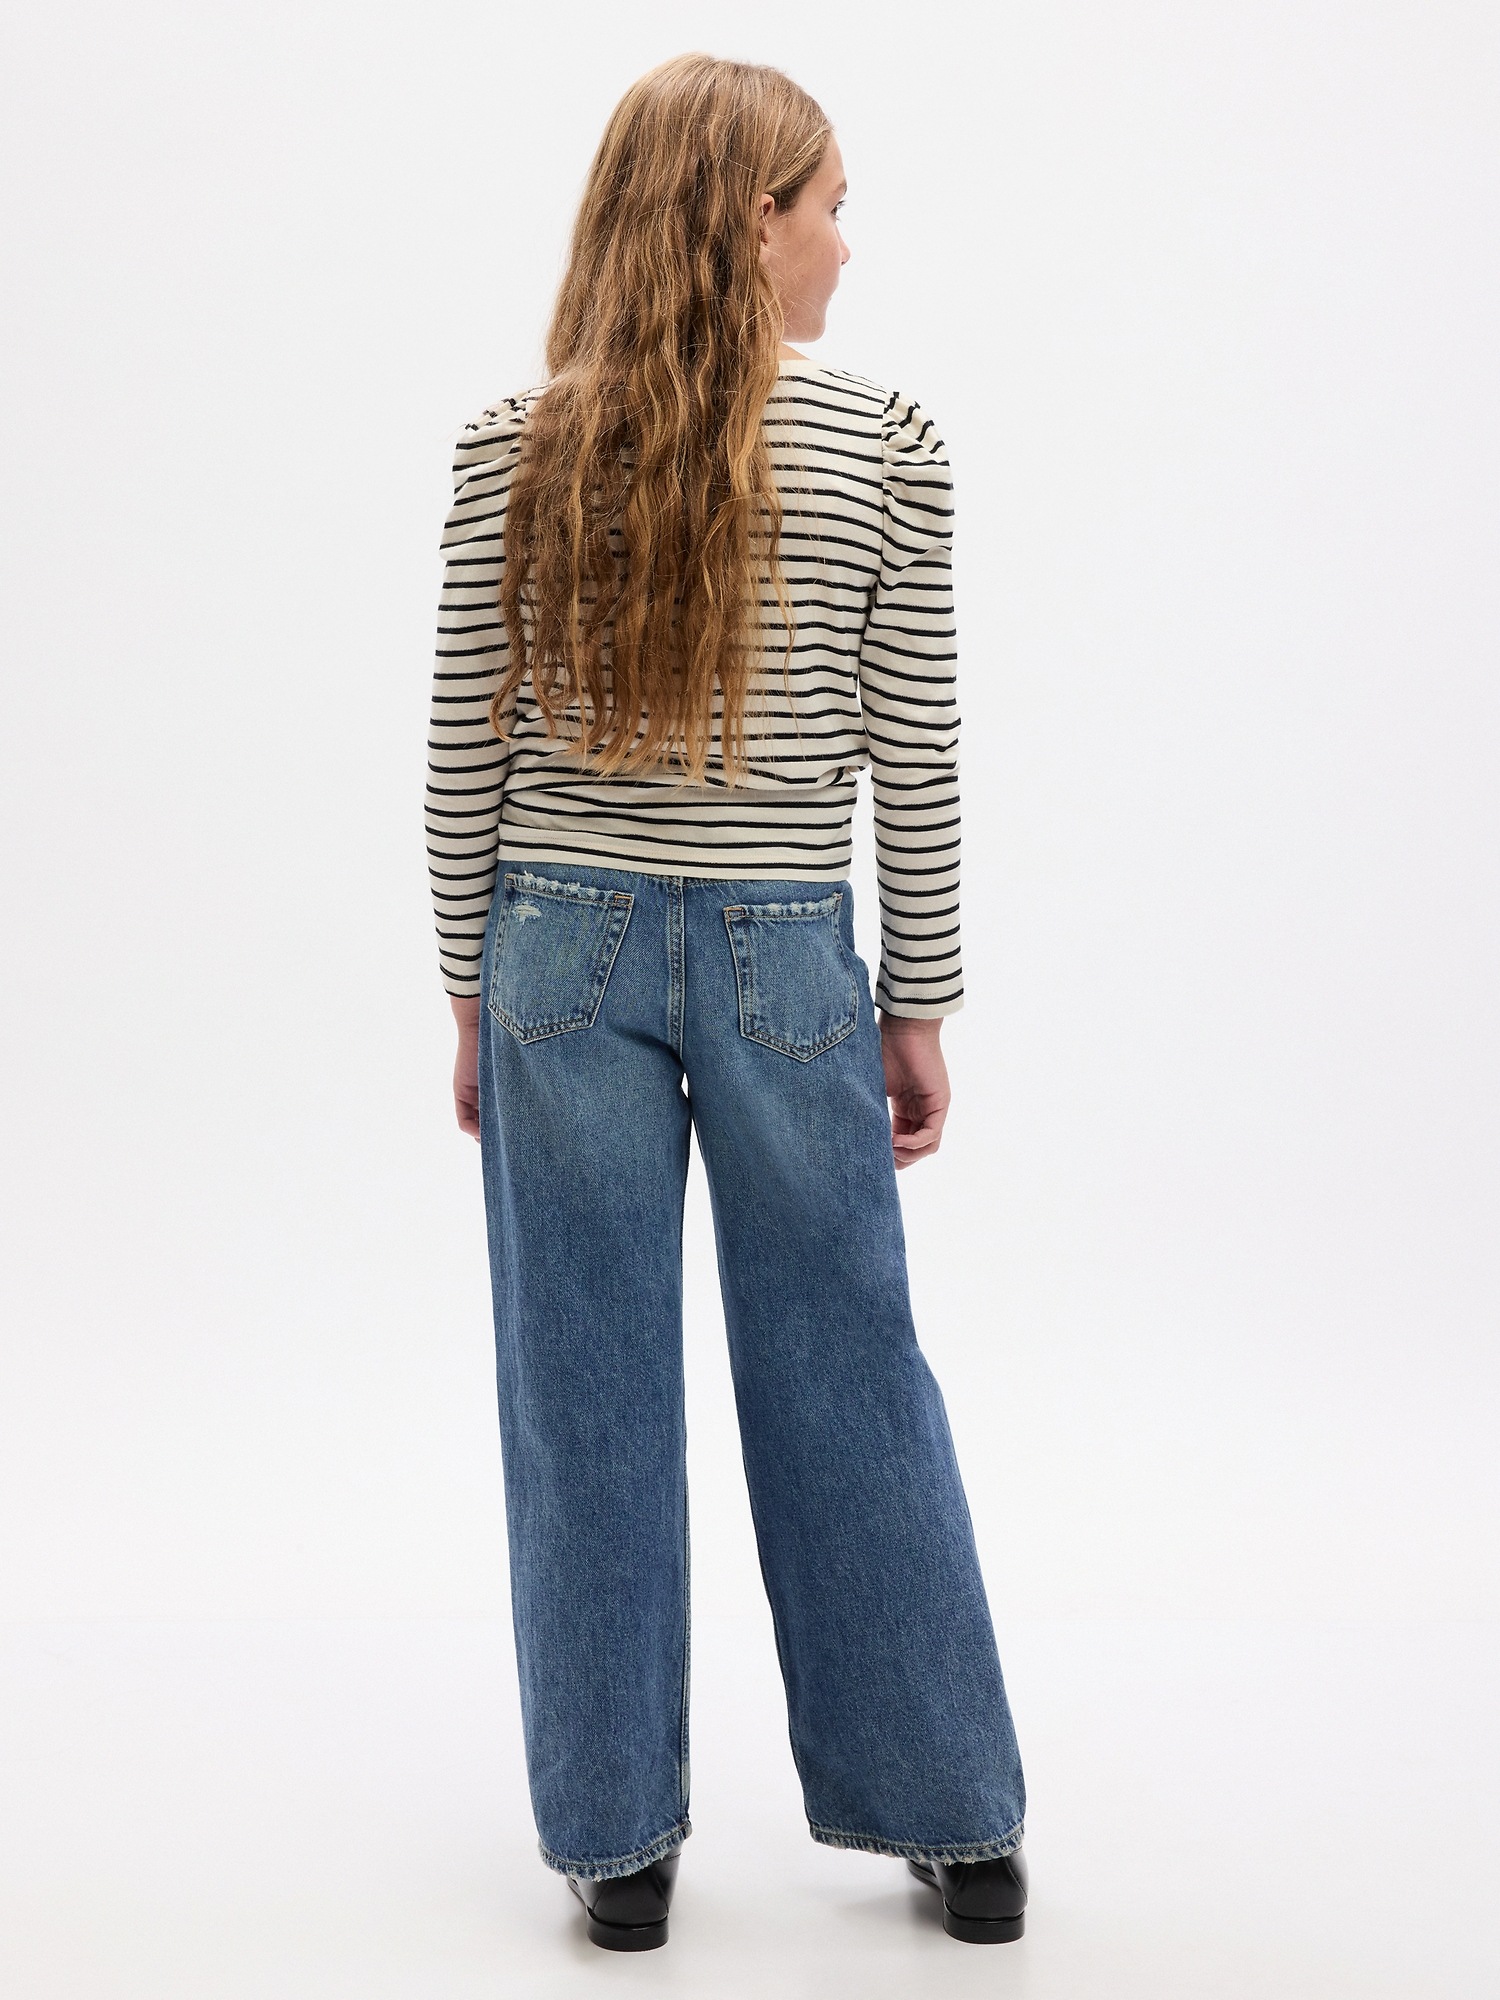 Kids Low Stride Relaxed Jeans | Gap